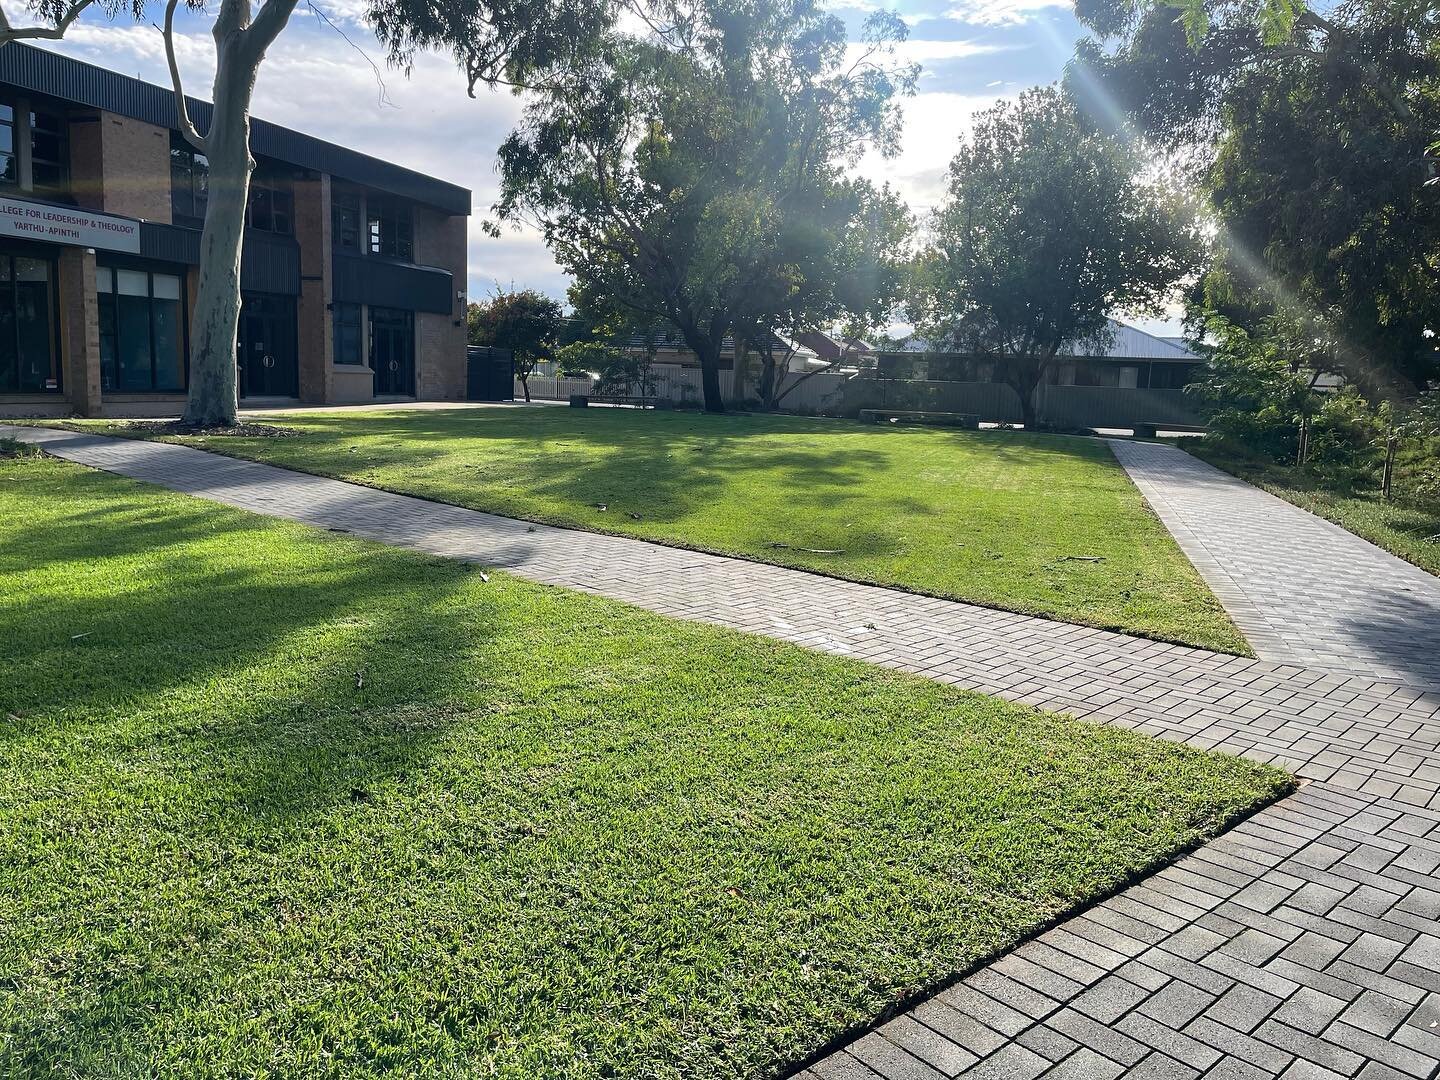 This lawn coming up nicely with weekly care

#contemporarygardenco #gardenmaintenance #lawncare #adelaide #southaustralia